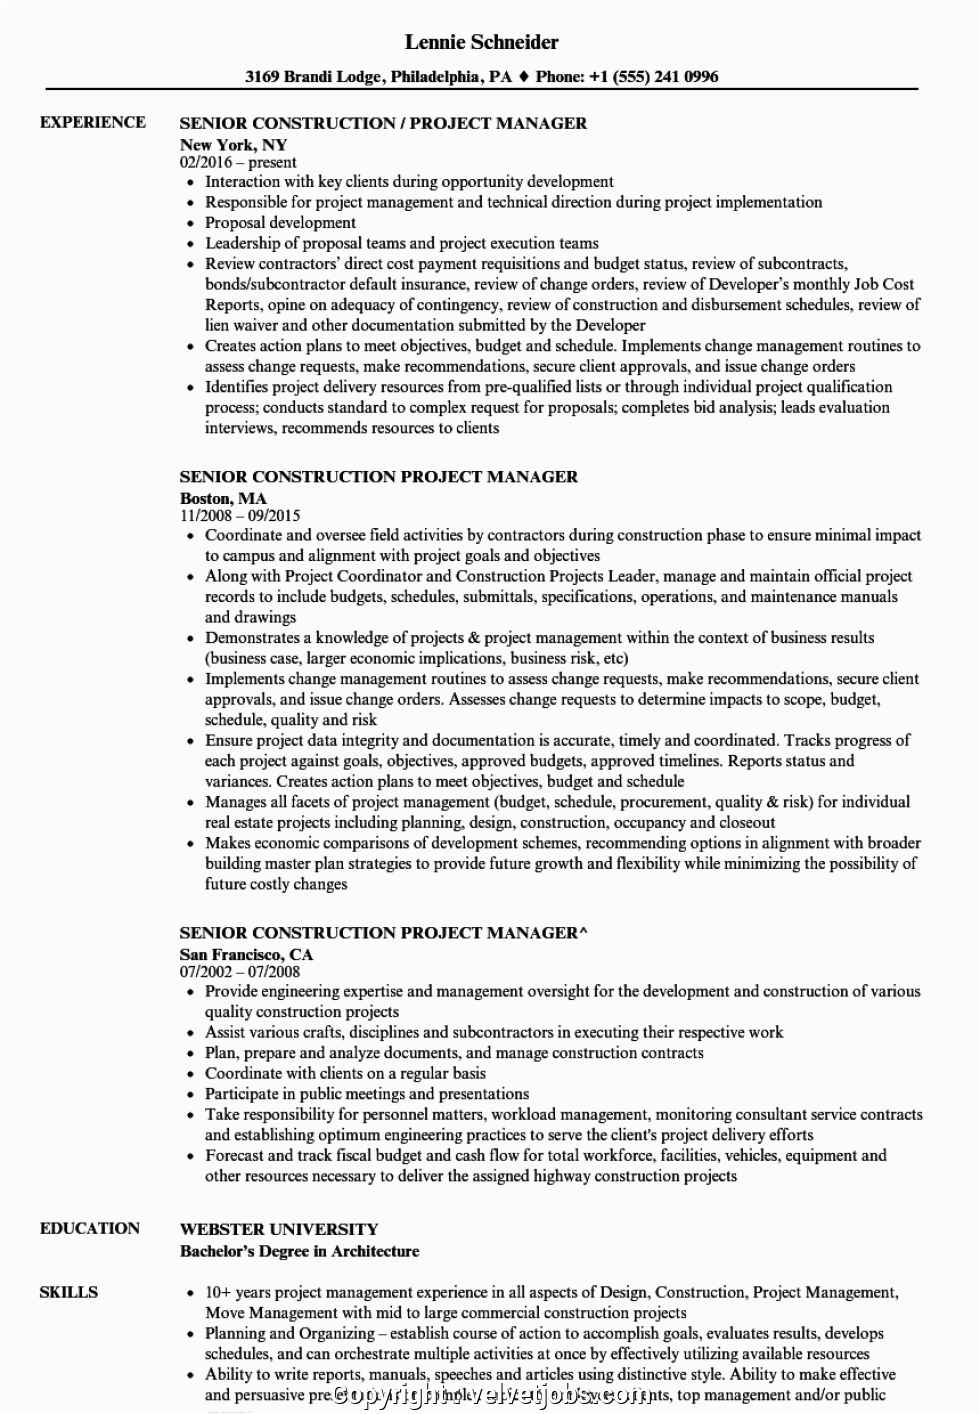 Resume Sample for Construction Project Manager Simple Construction Project Manager Resume Sample Senior